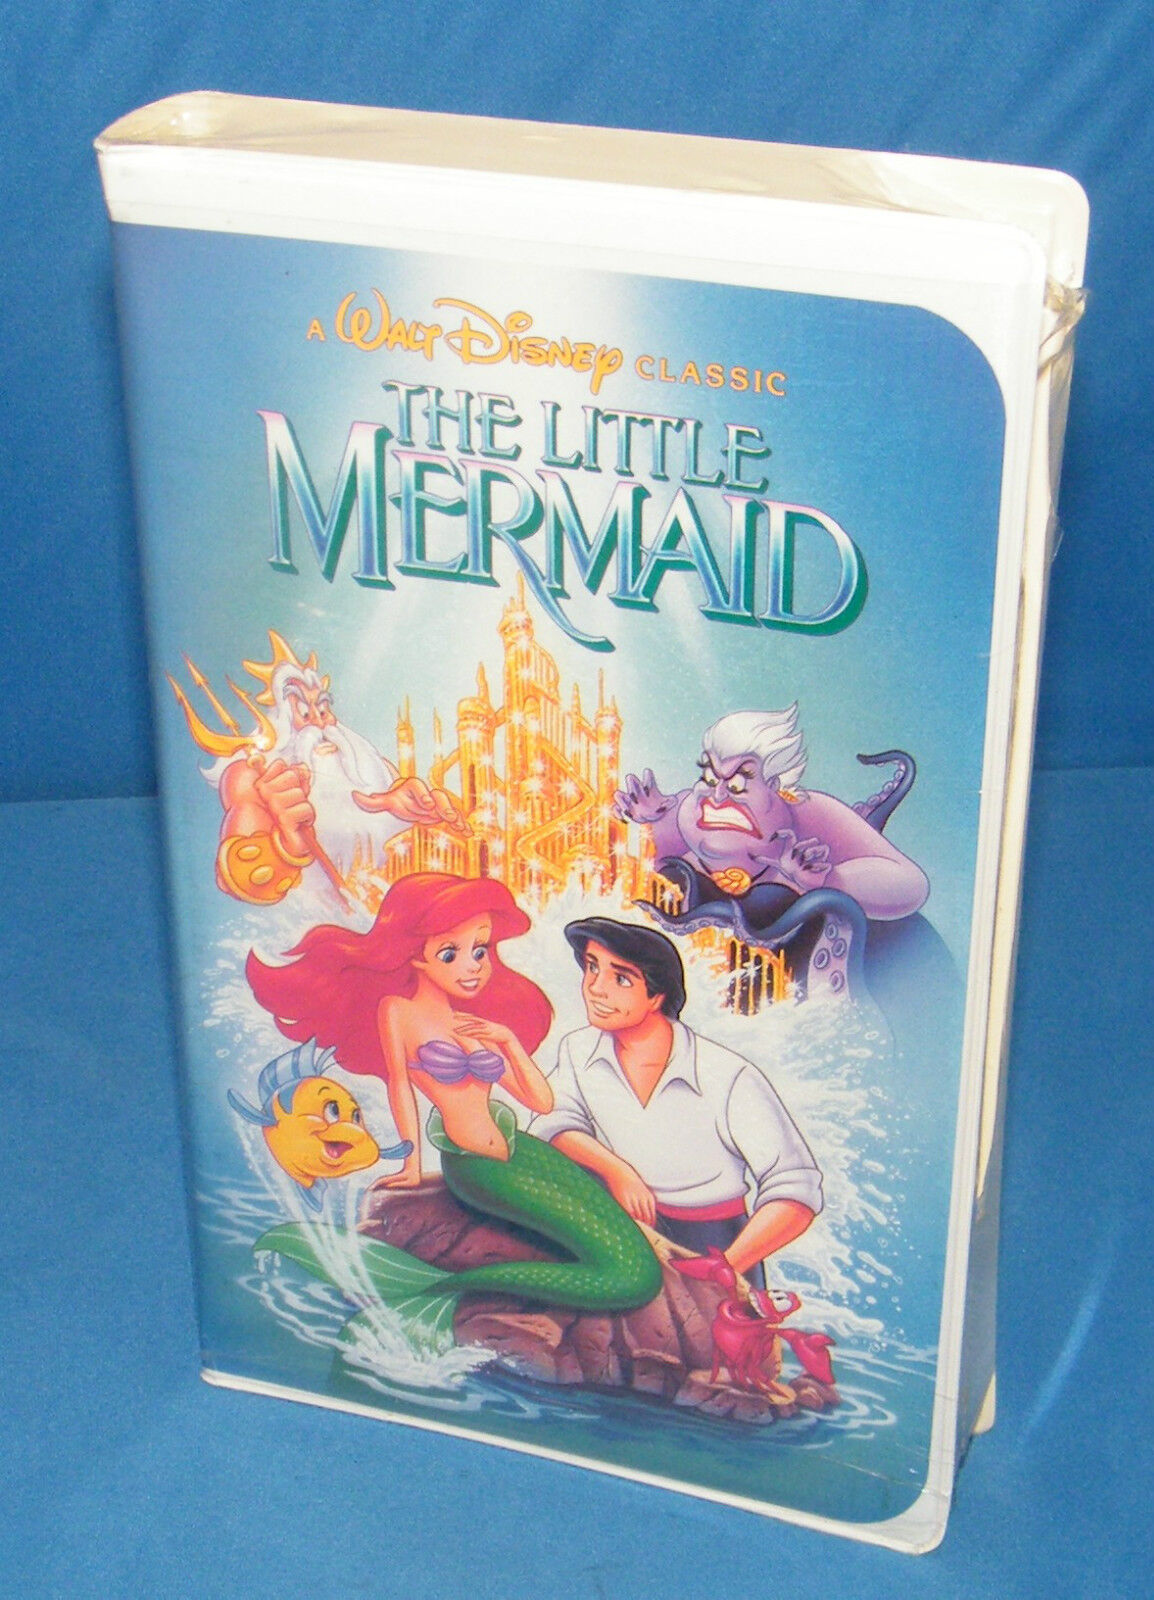 The Little Mermaid (Disney VHS Black Diamond) Collectors Special EXTREMELY RARE